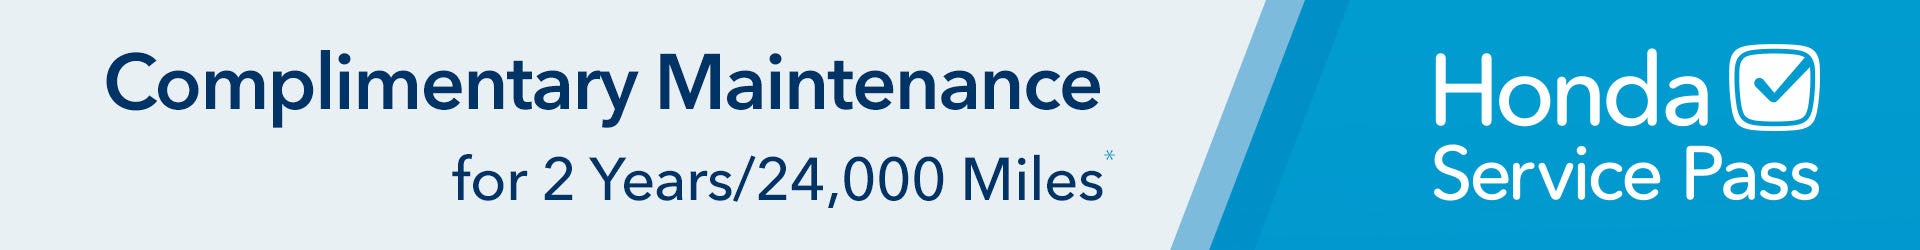 Complimentary Maintenance for 2 years / 24,000 Miles Honda Service Pass | Valley Honda in Monroeville PA